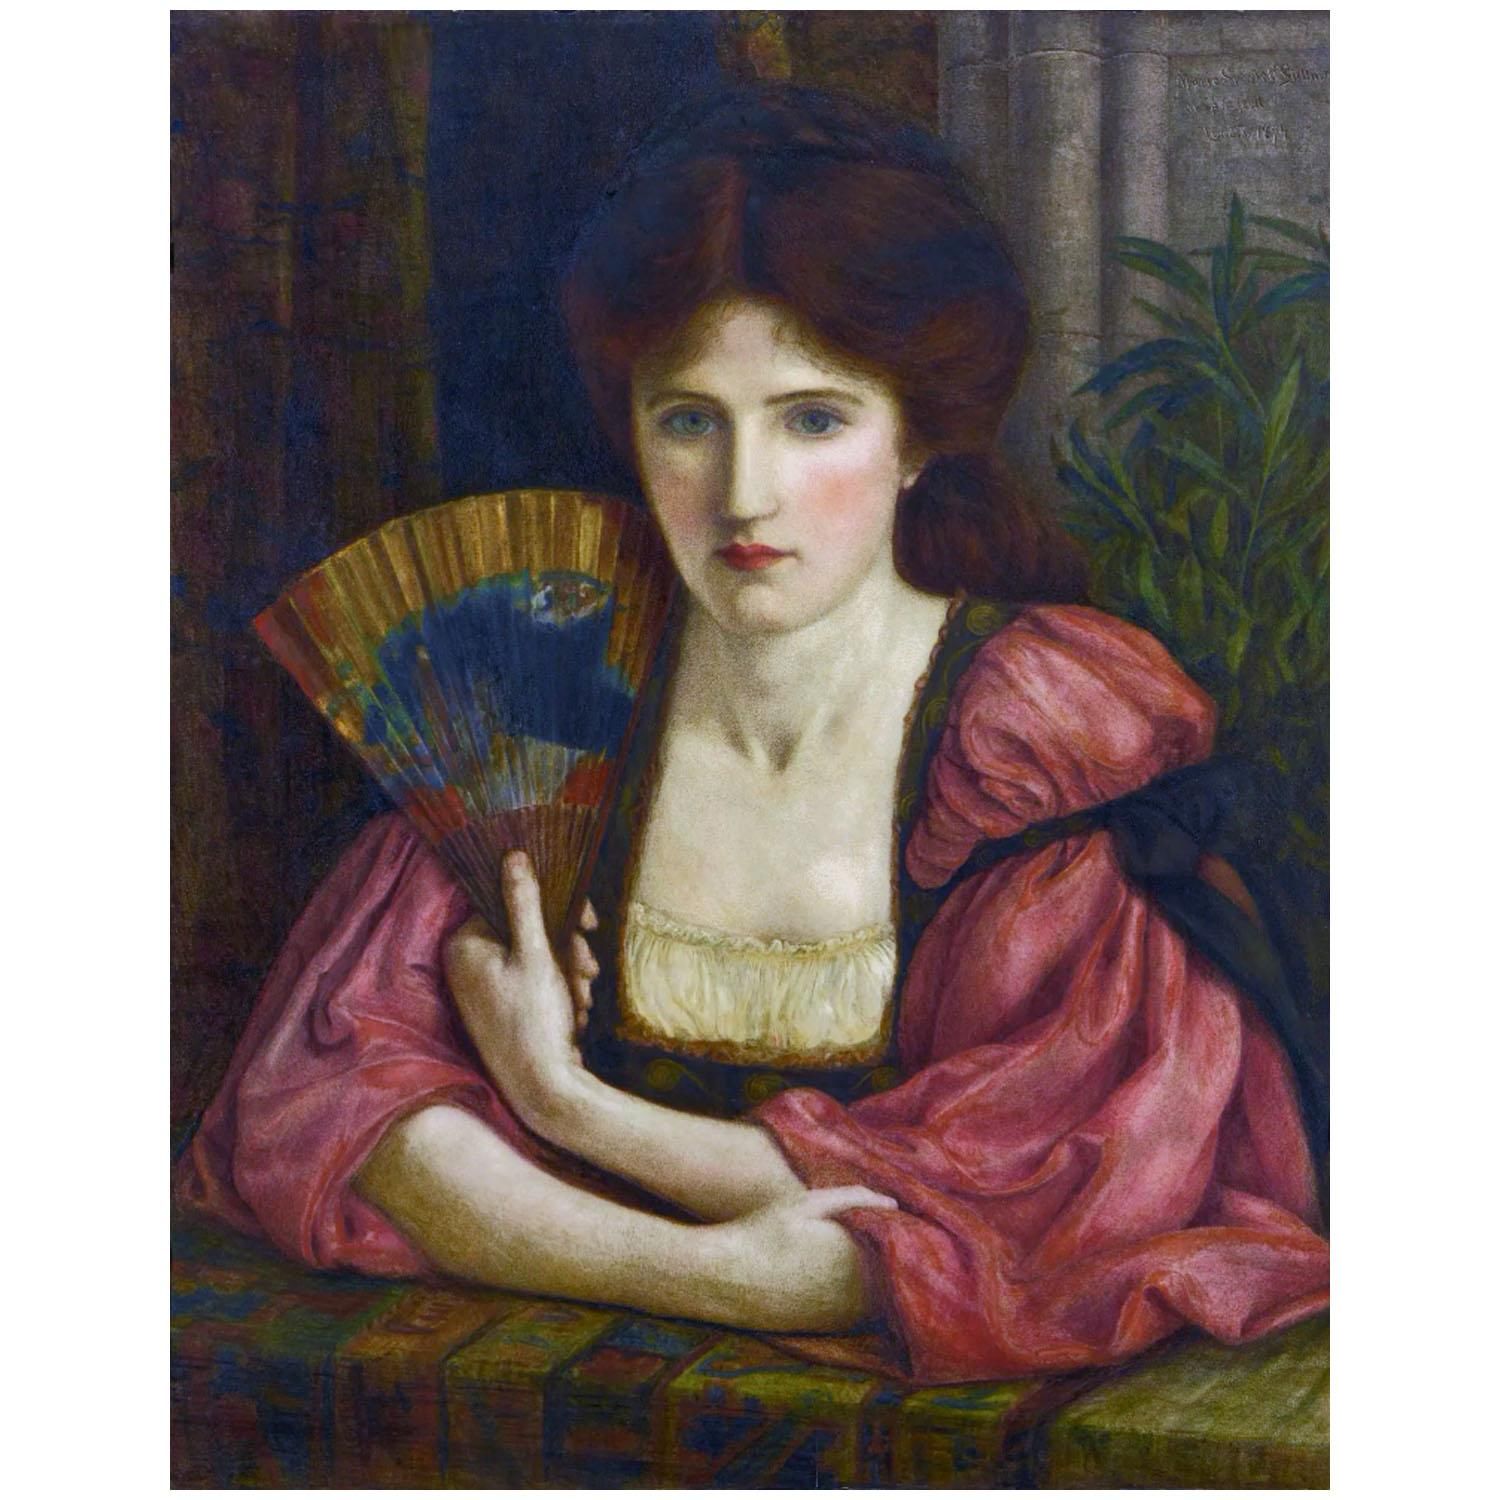 Marie Spartali. Self-Portrait with a Fan. 1874. Private collection